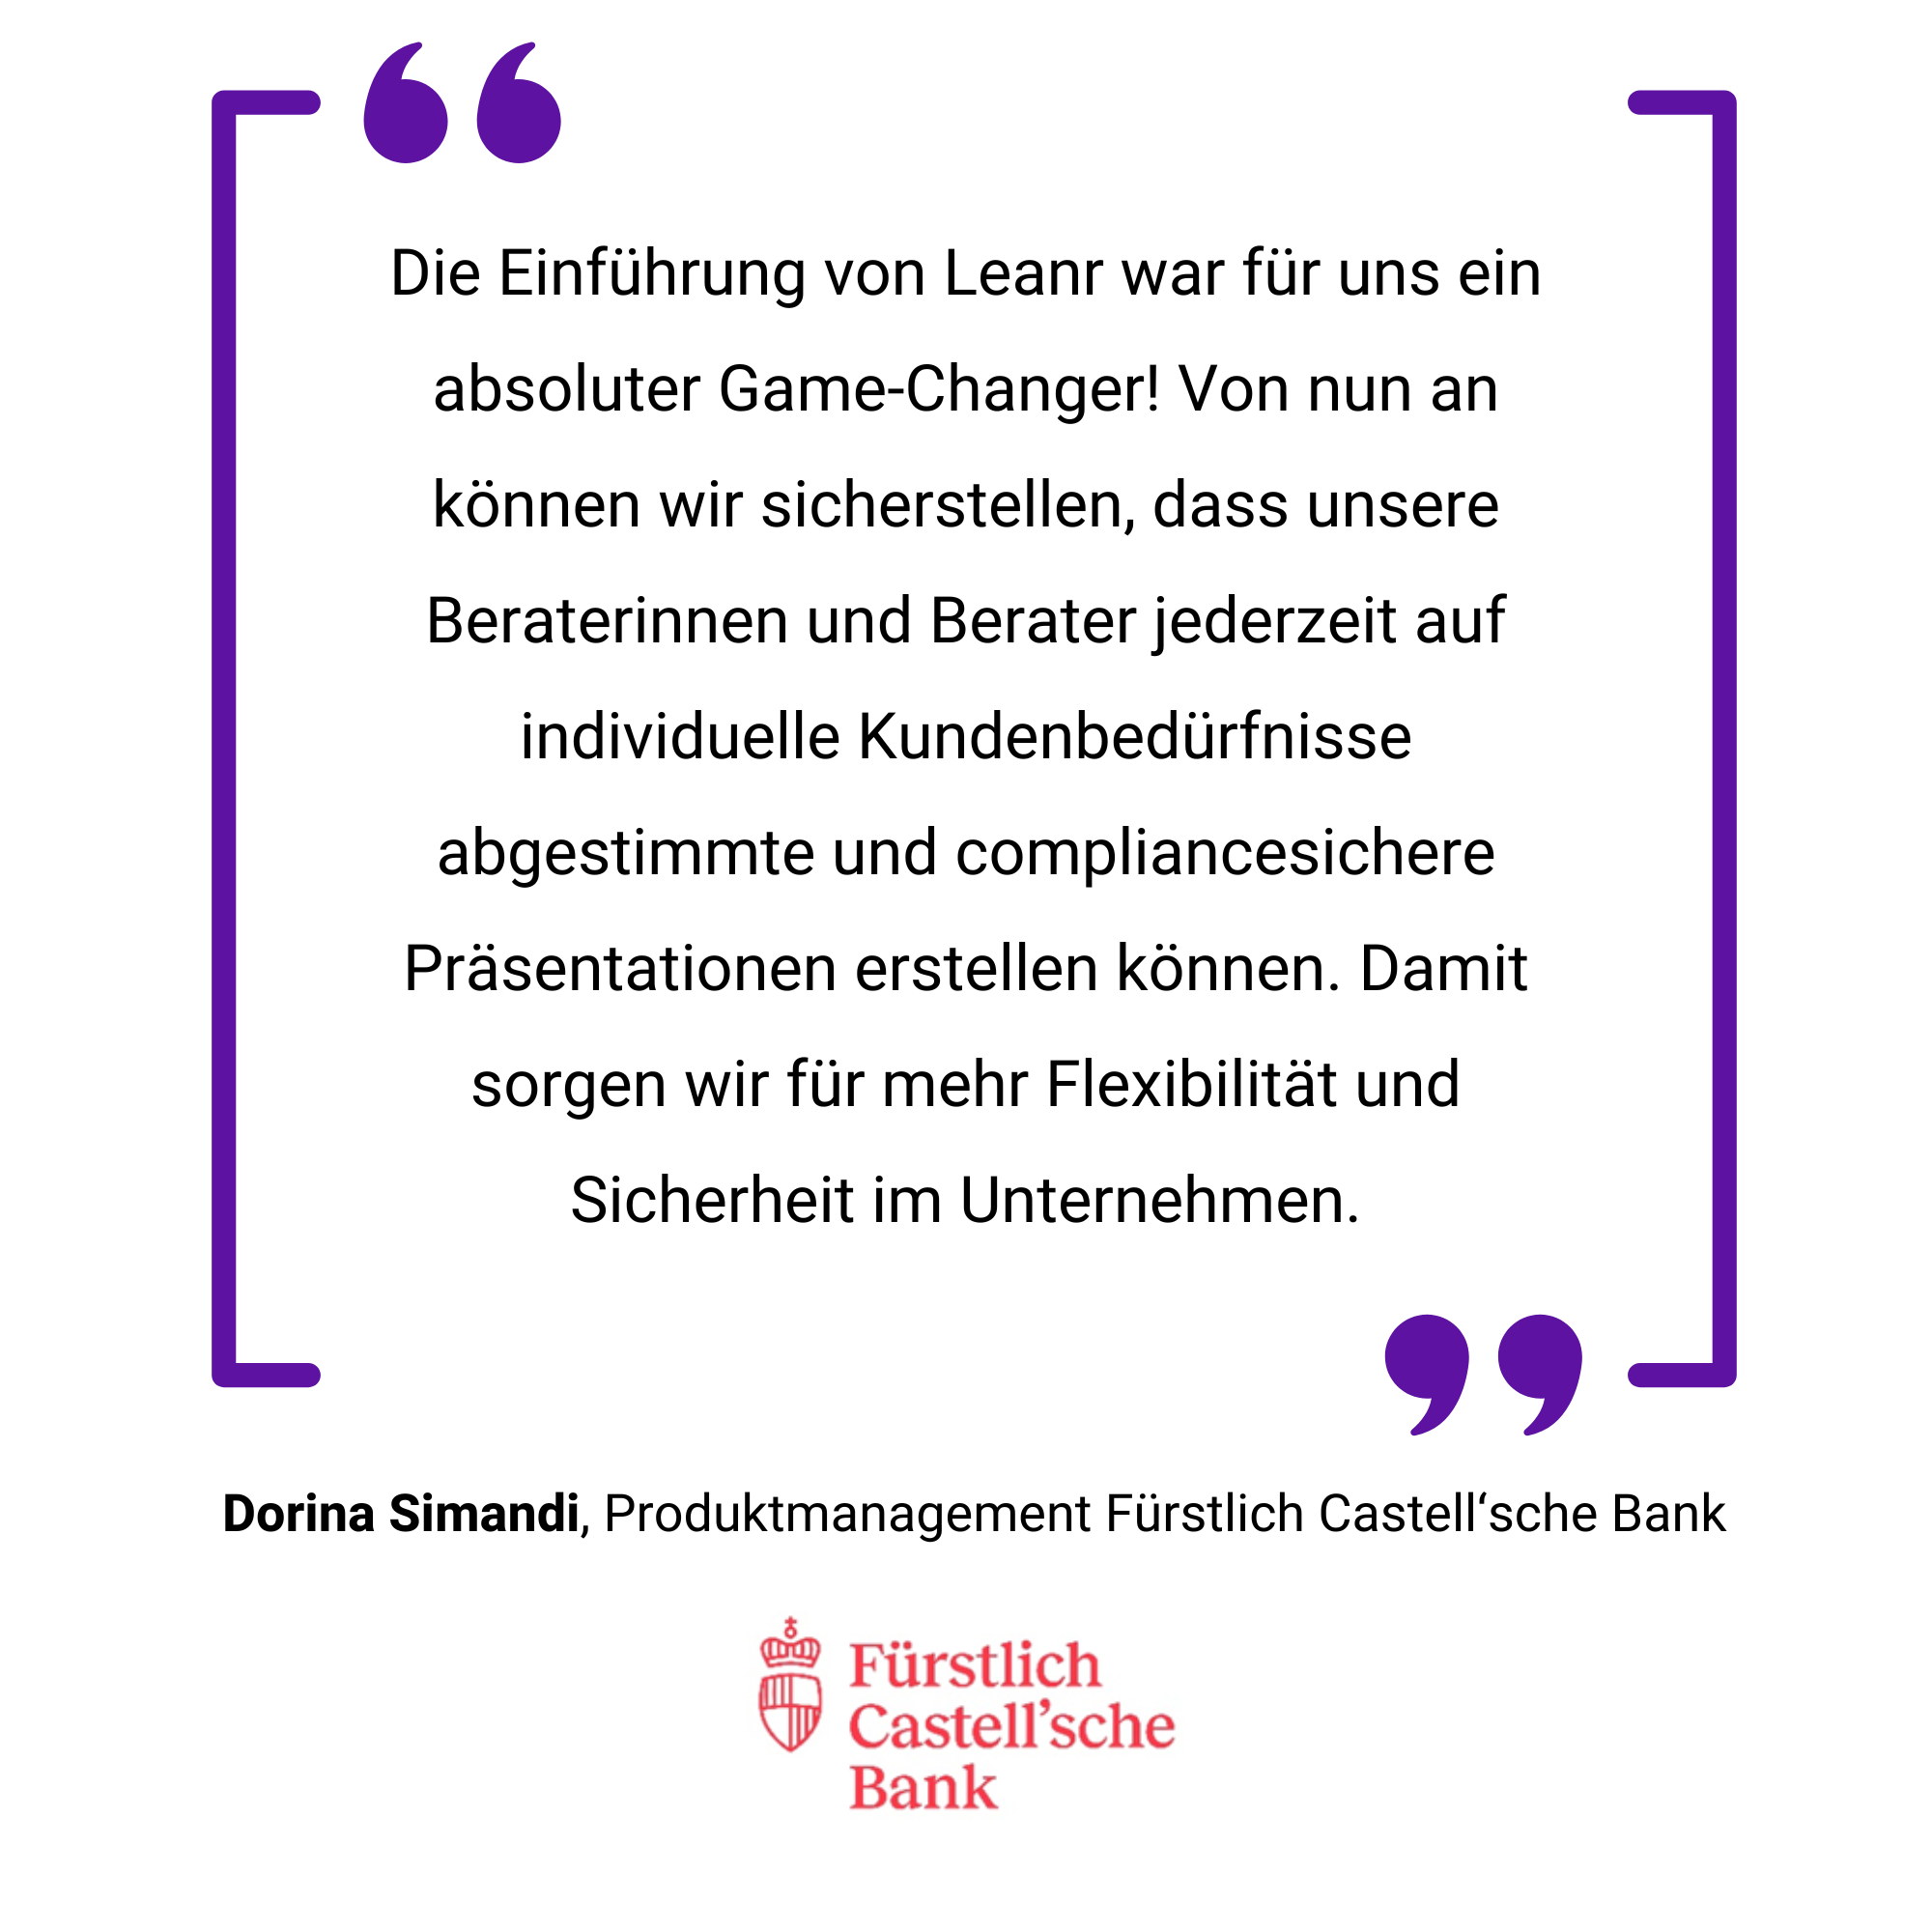 A promotional graphic with a quote from dorina simandi on the benefits of learnr for fürstliche castell's bank, featuring the bank's logo at the bottom right.